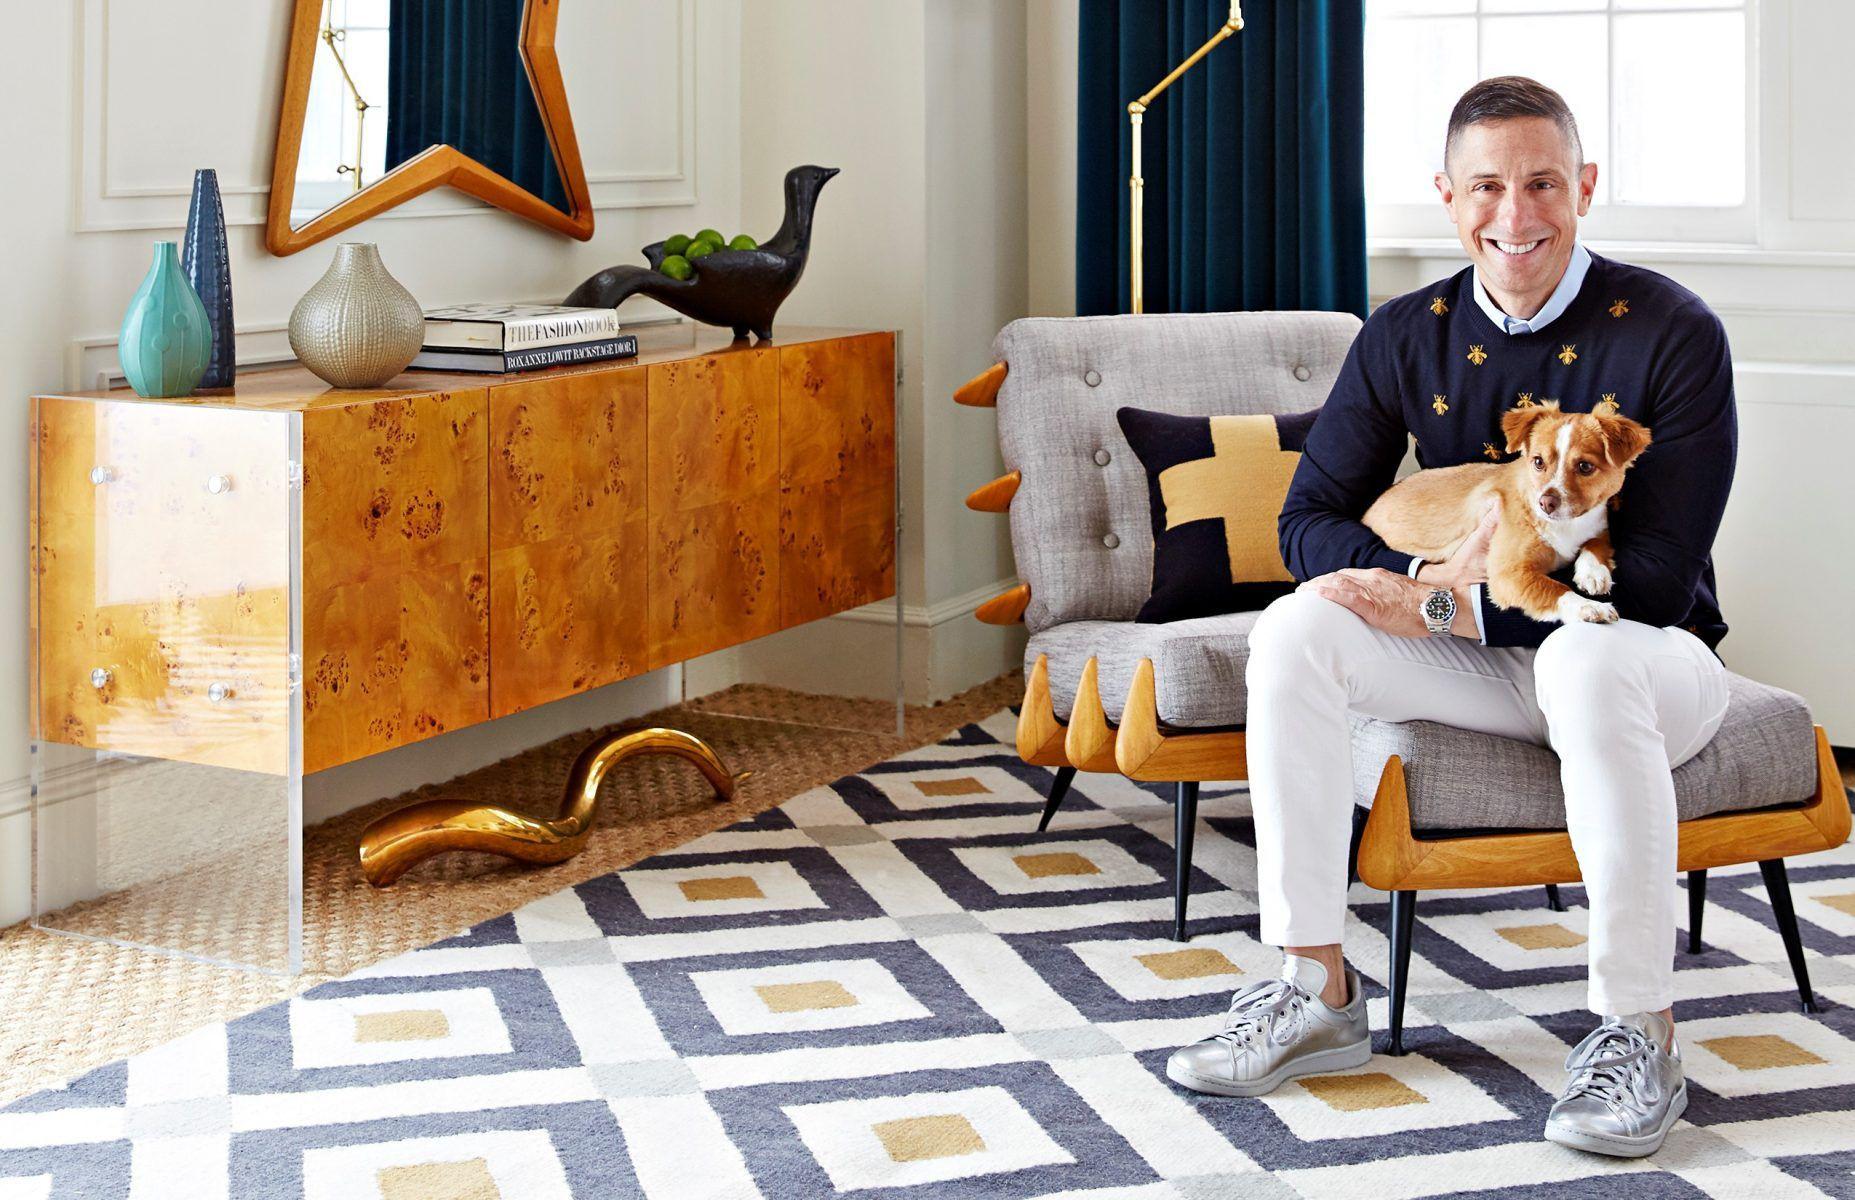 Jonathan Adler's New Furniture Collection Is So Playful